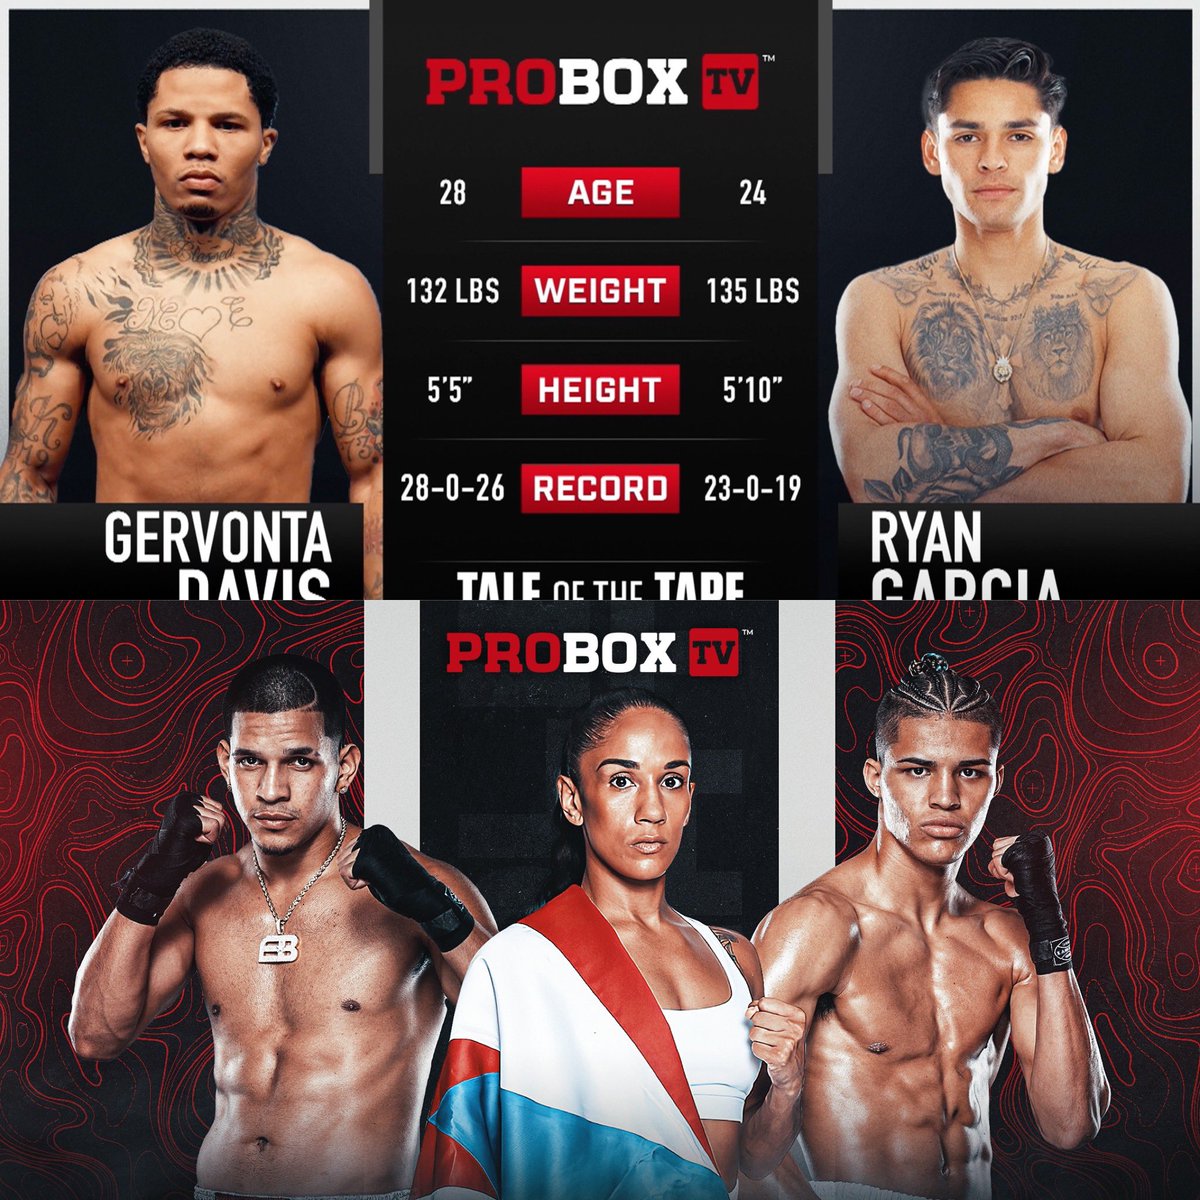 LIVE NOW ON YOUR BOXING CHANNEL 🫵 BIG FIGHT GUIDE - TANK VS RYAN & MORE 👊 WHO IS THE FACE OF PUERTO RICAN BOXING? 🇵🇷 Head over to ProBoxTV to catch up on all the latest news presented by Juan Manuel Marquez, @PaulMalignaggi @ChrisAlgieri & @ClaudiaTrejos